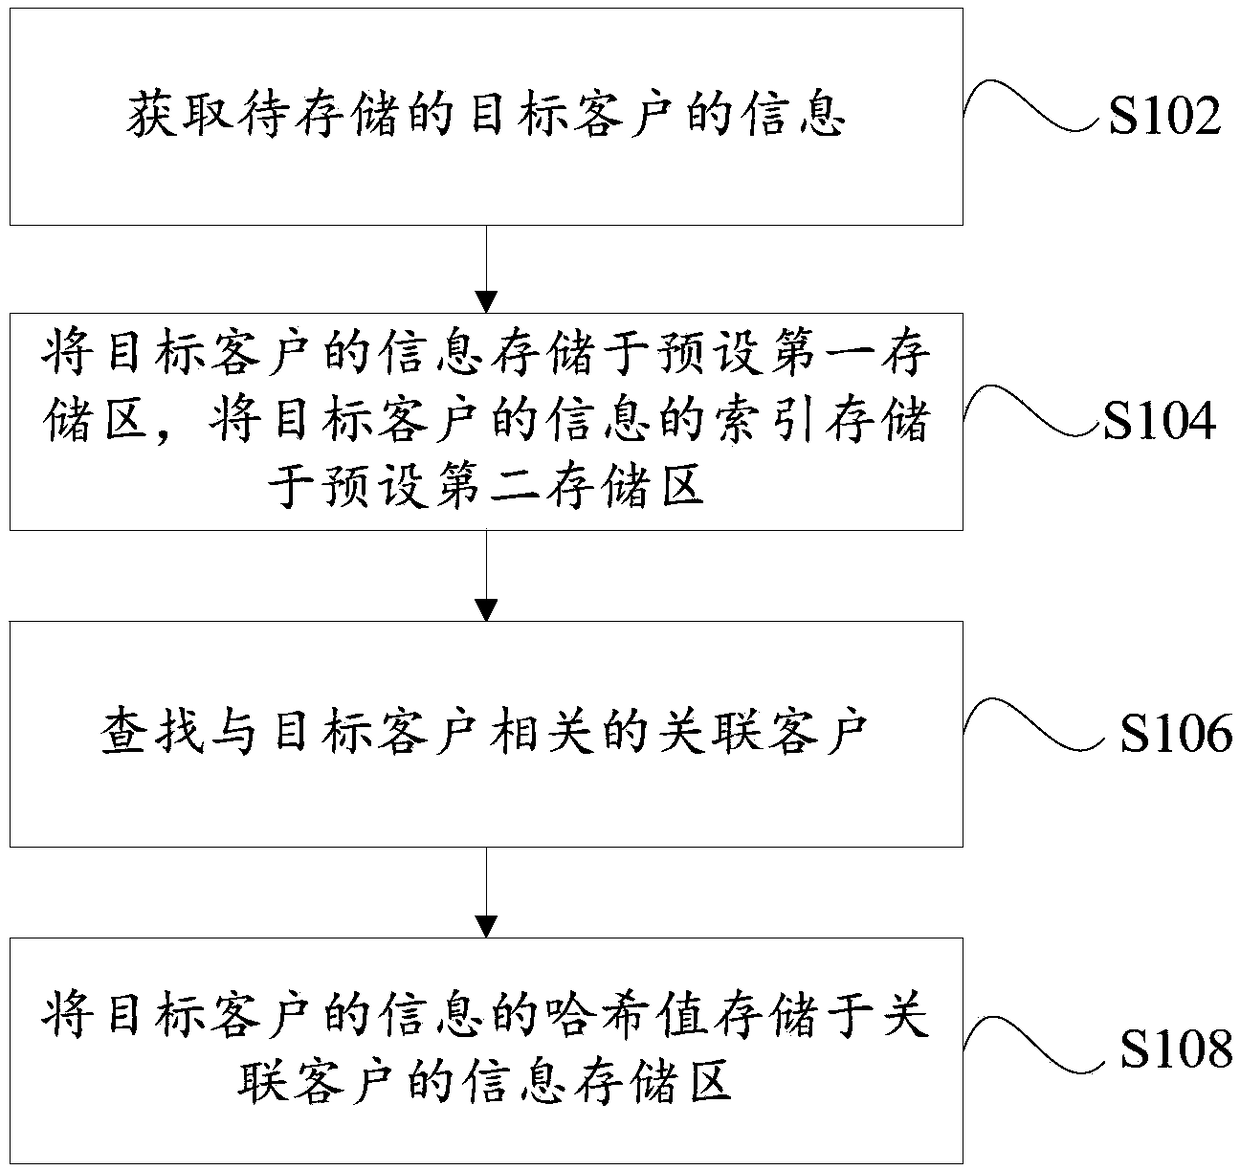 Information storage method and device